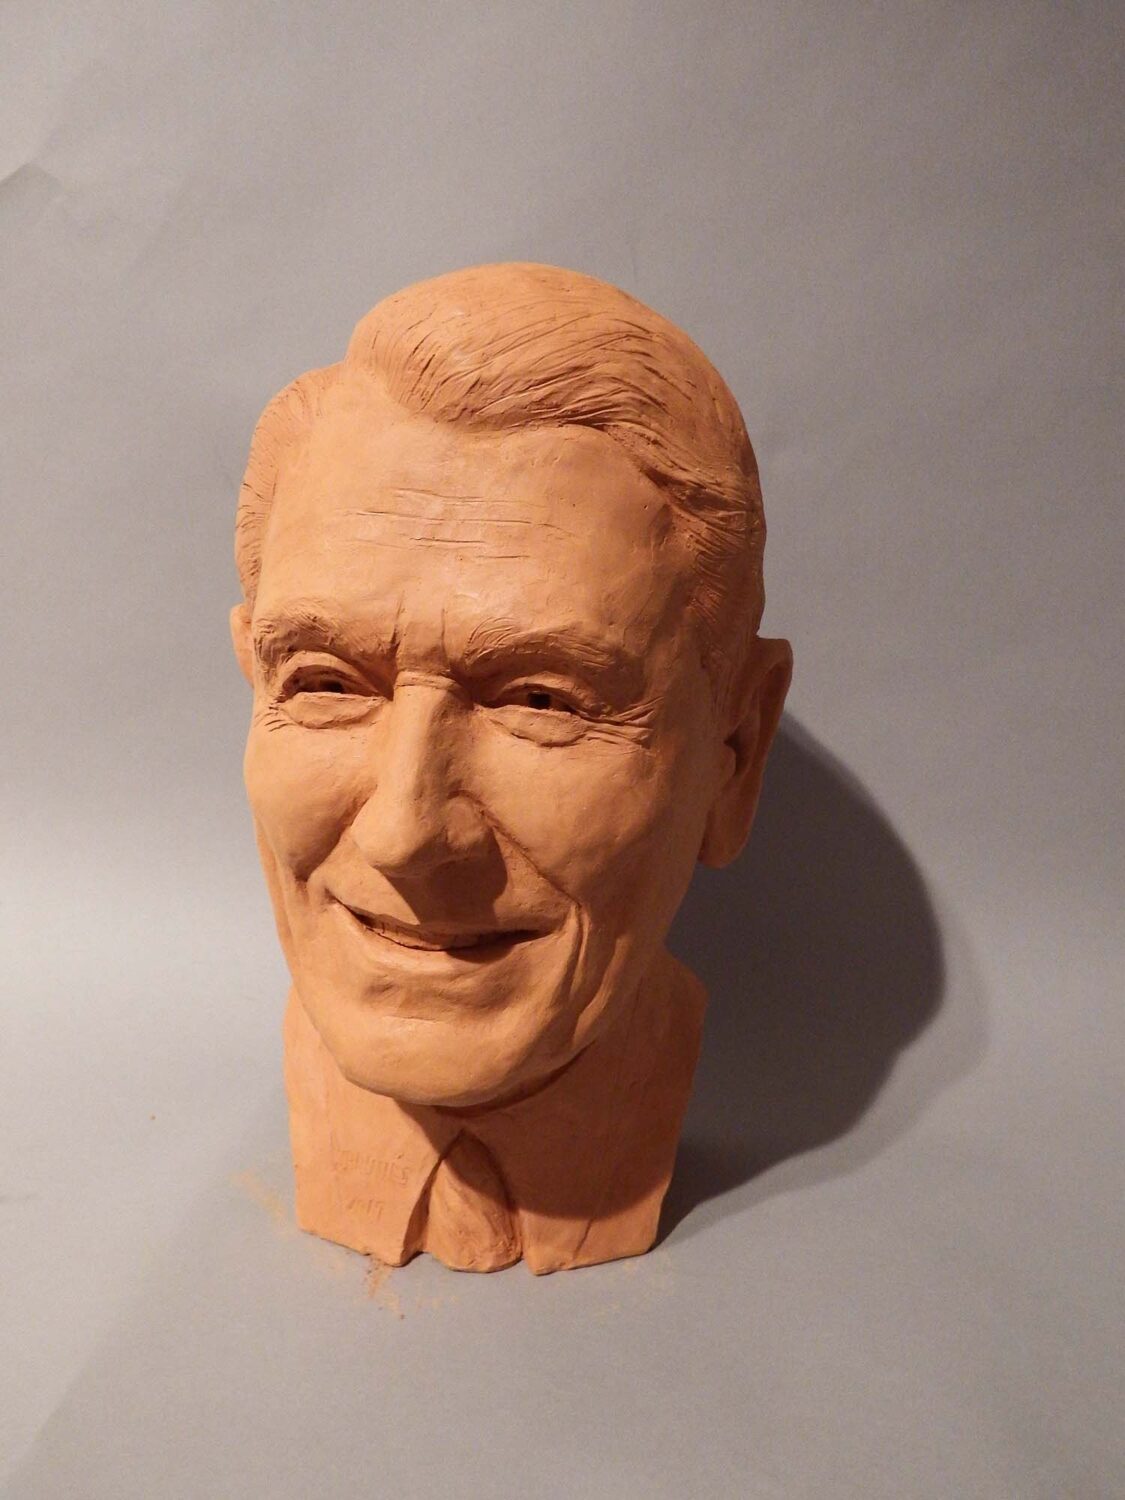 thumbnail of Sculpture of George H. W. Bush made out of Terra cotta